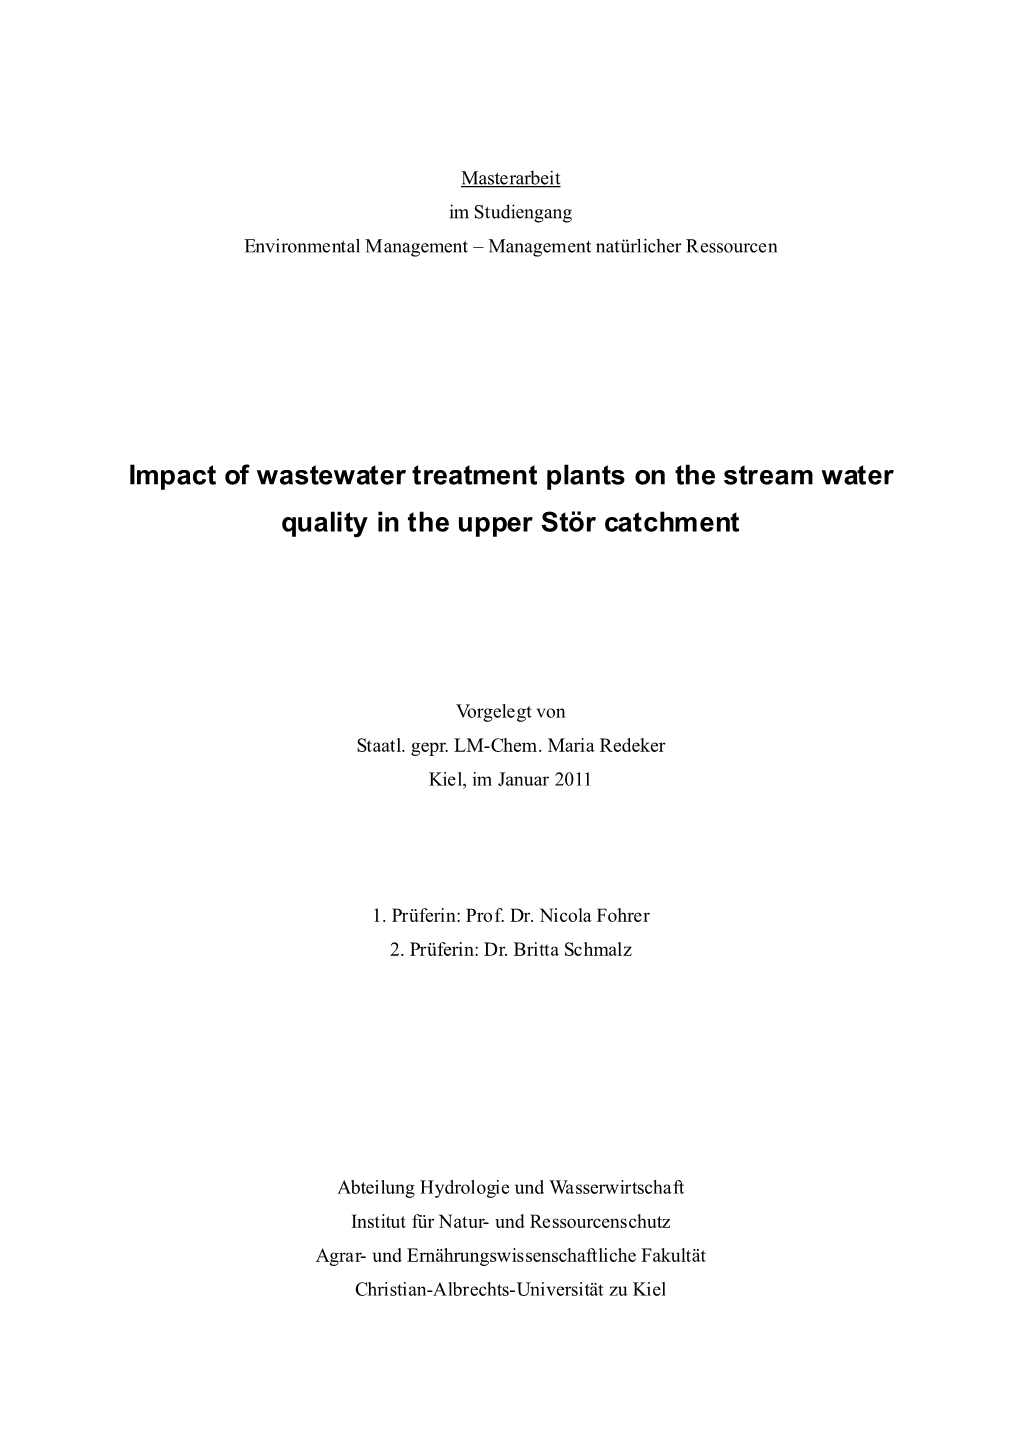 Impact of Wastewater Treatment Plants on the Stream Water Quality in the Upper Stör Catchment